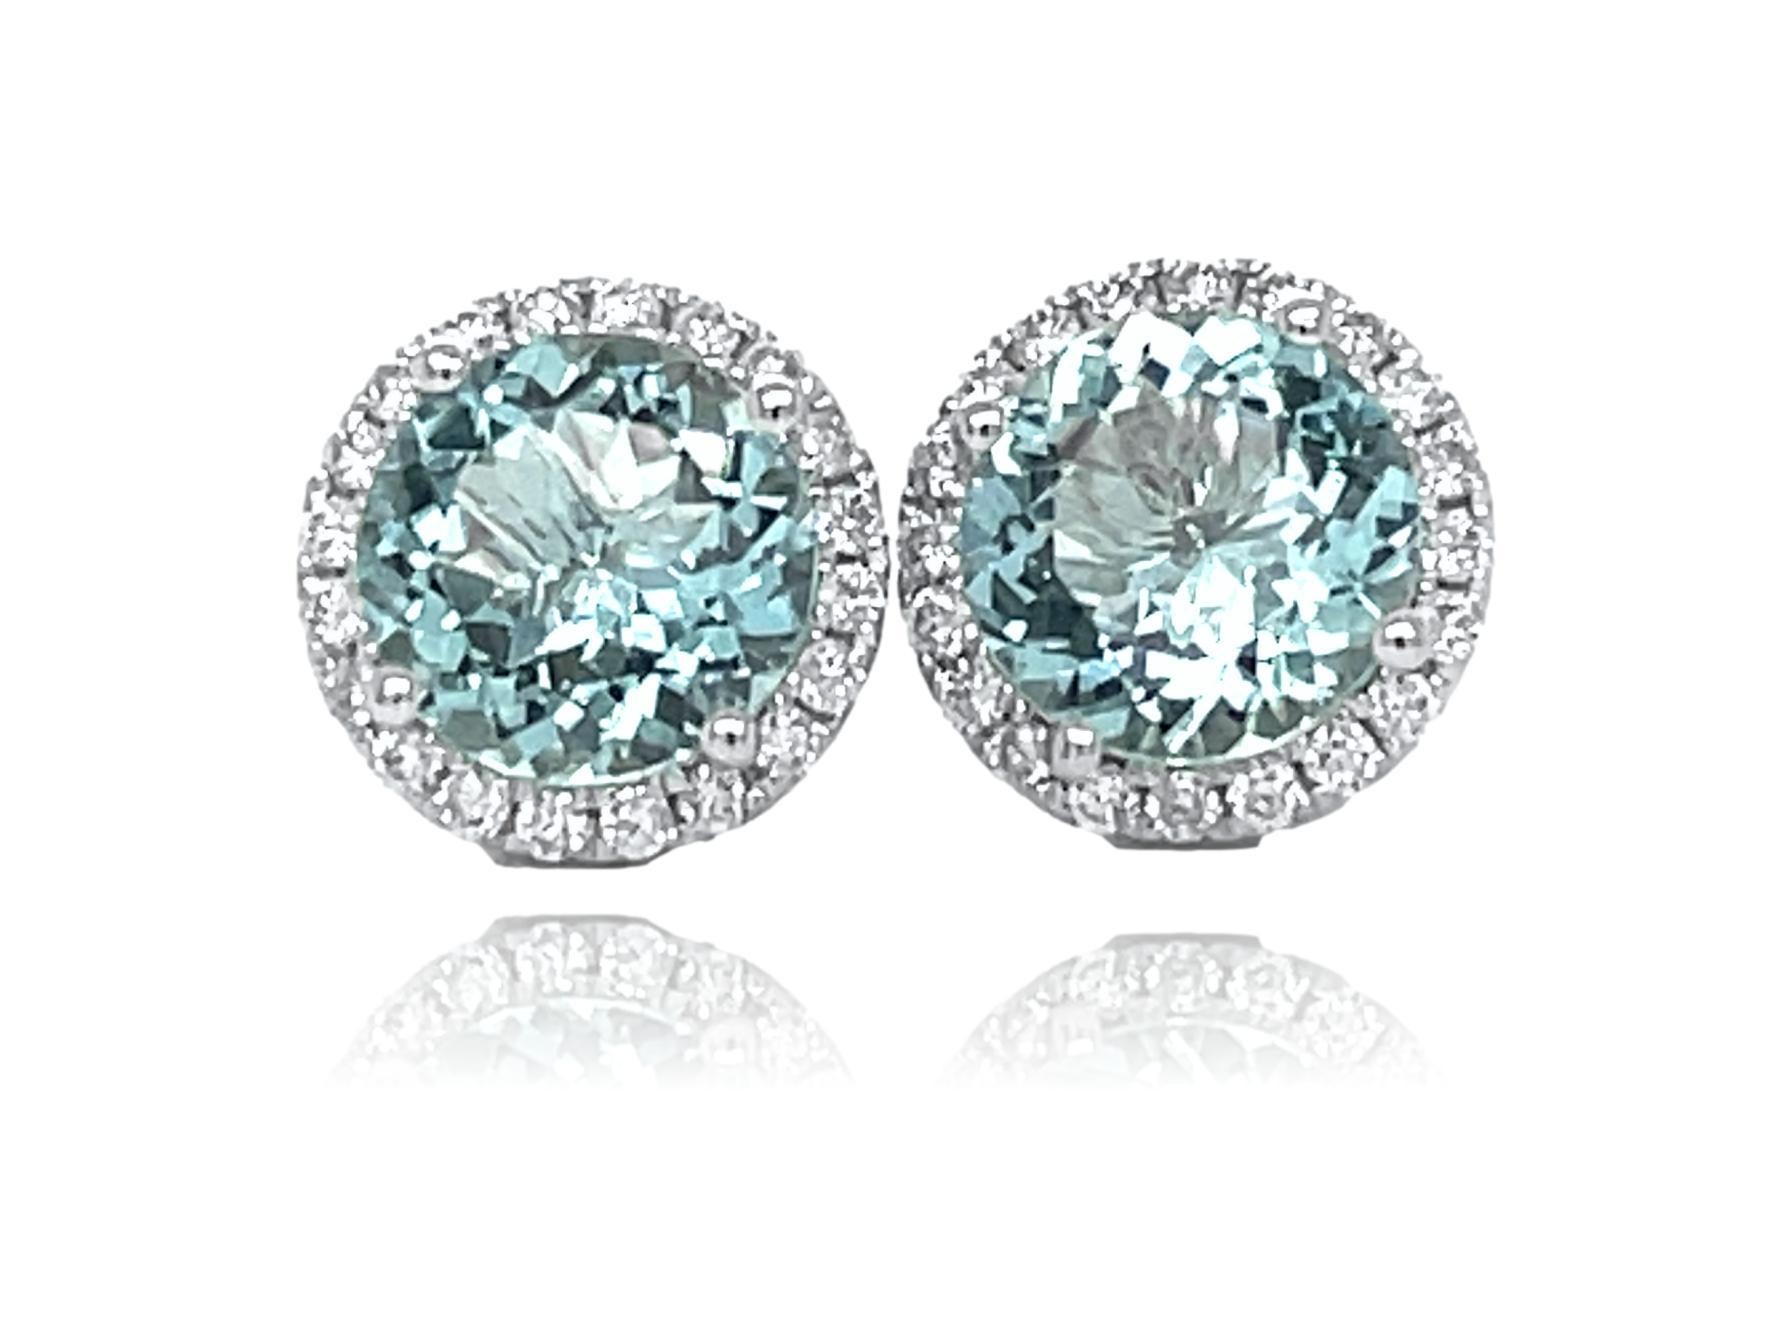 These stunning earrings have vibrant 9mm top quality Aquamarine center surrounded by sparkling brilliant cut diamonds. These earrings come in a beautiful black box for the perfect gift. They have detailed tags and are brand new. 

14KW gold:  2.85